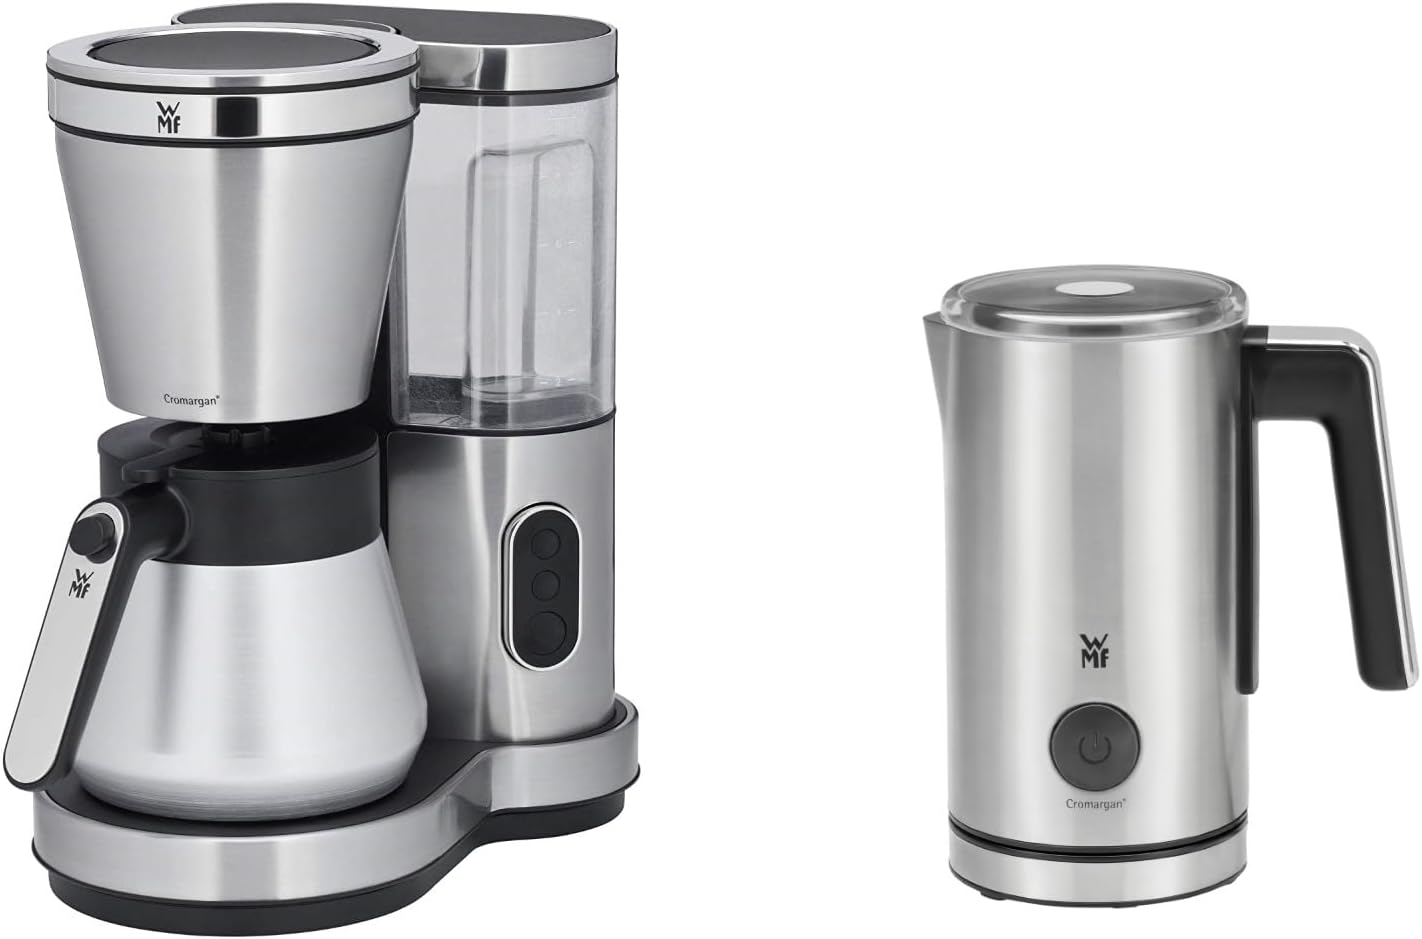 WMF Set Lono Filter Coffee Machine (800 W, with Thermos Flask, Filter Coffee, 8 Cups) and Stelio Milk Frother (500 W, 150-250 ml, non-stick coating) Cromargan Matt / Silver